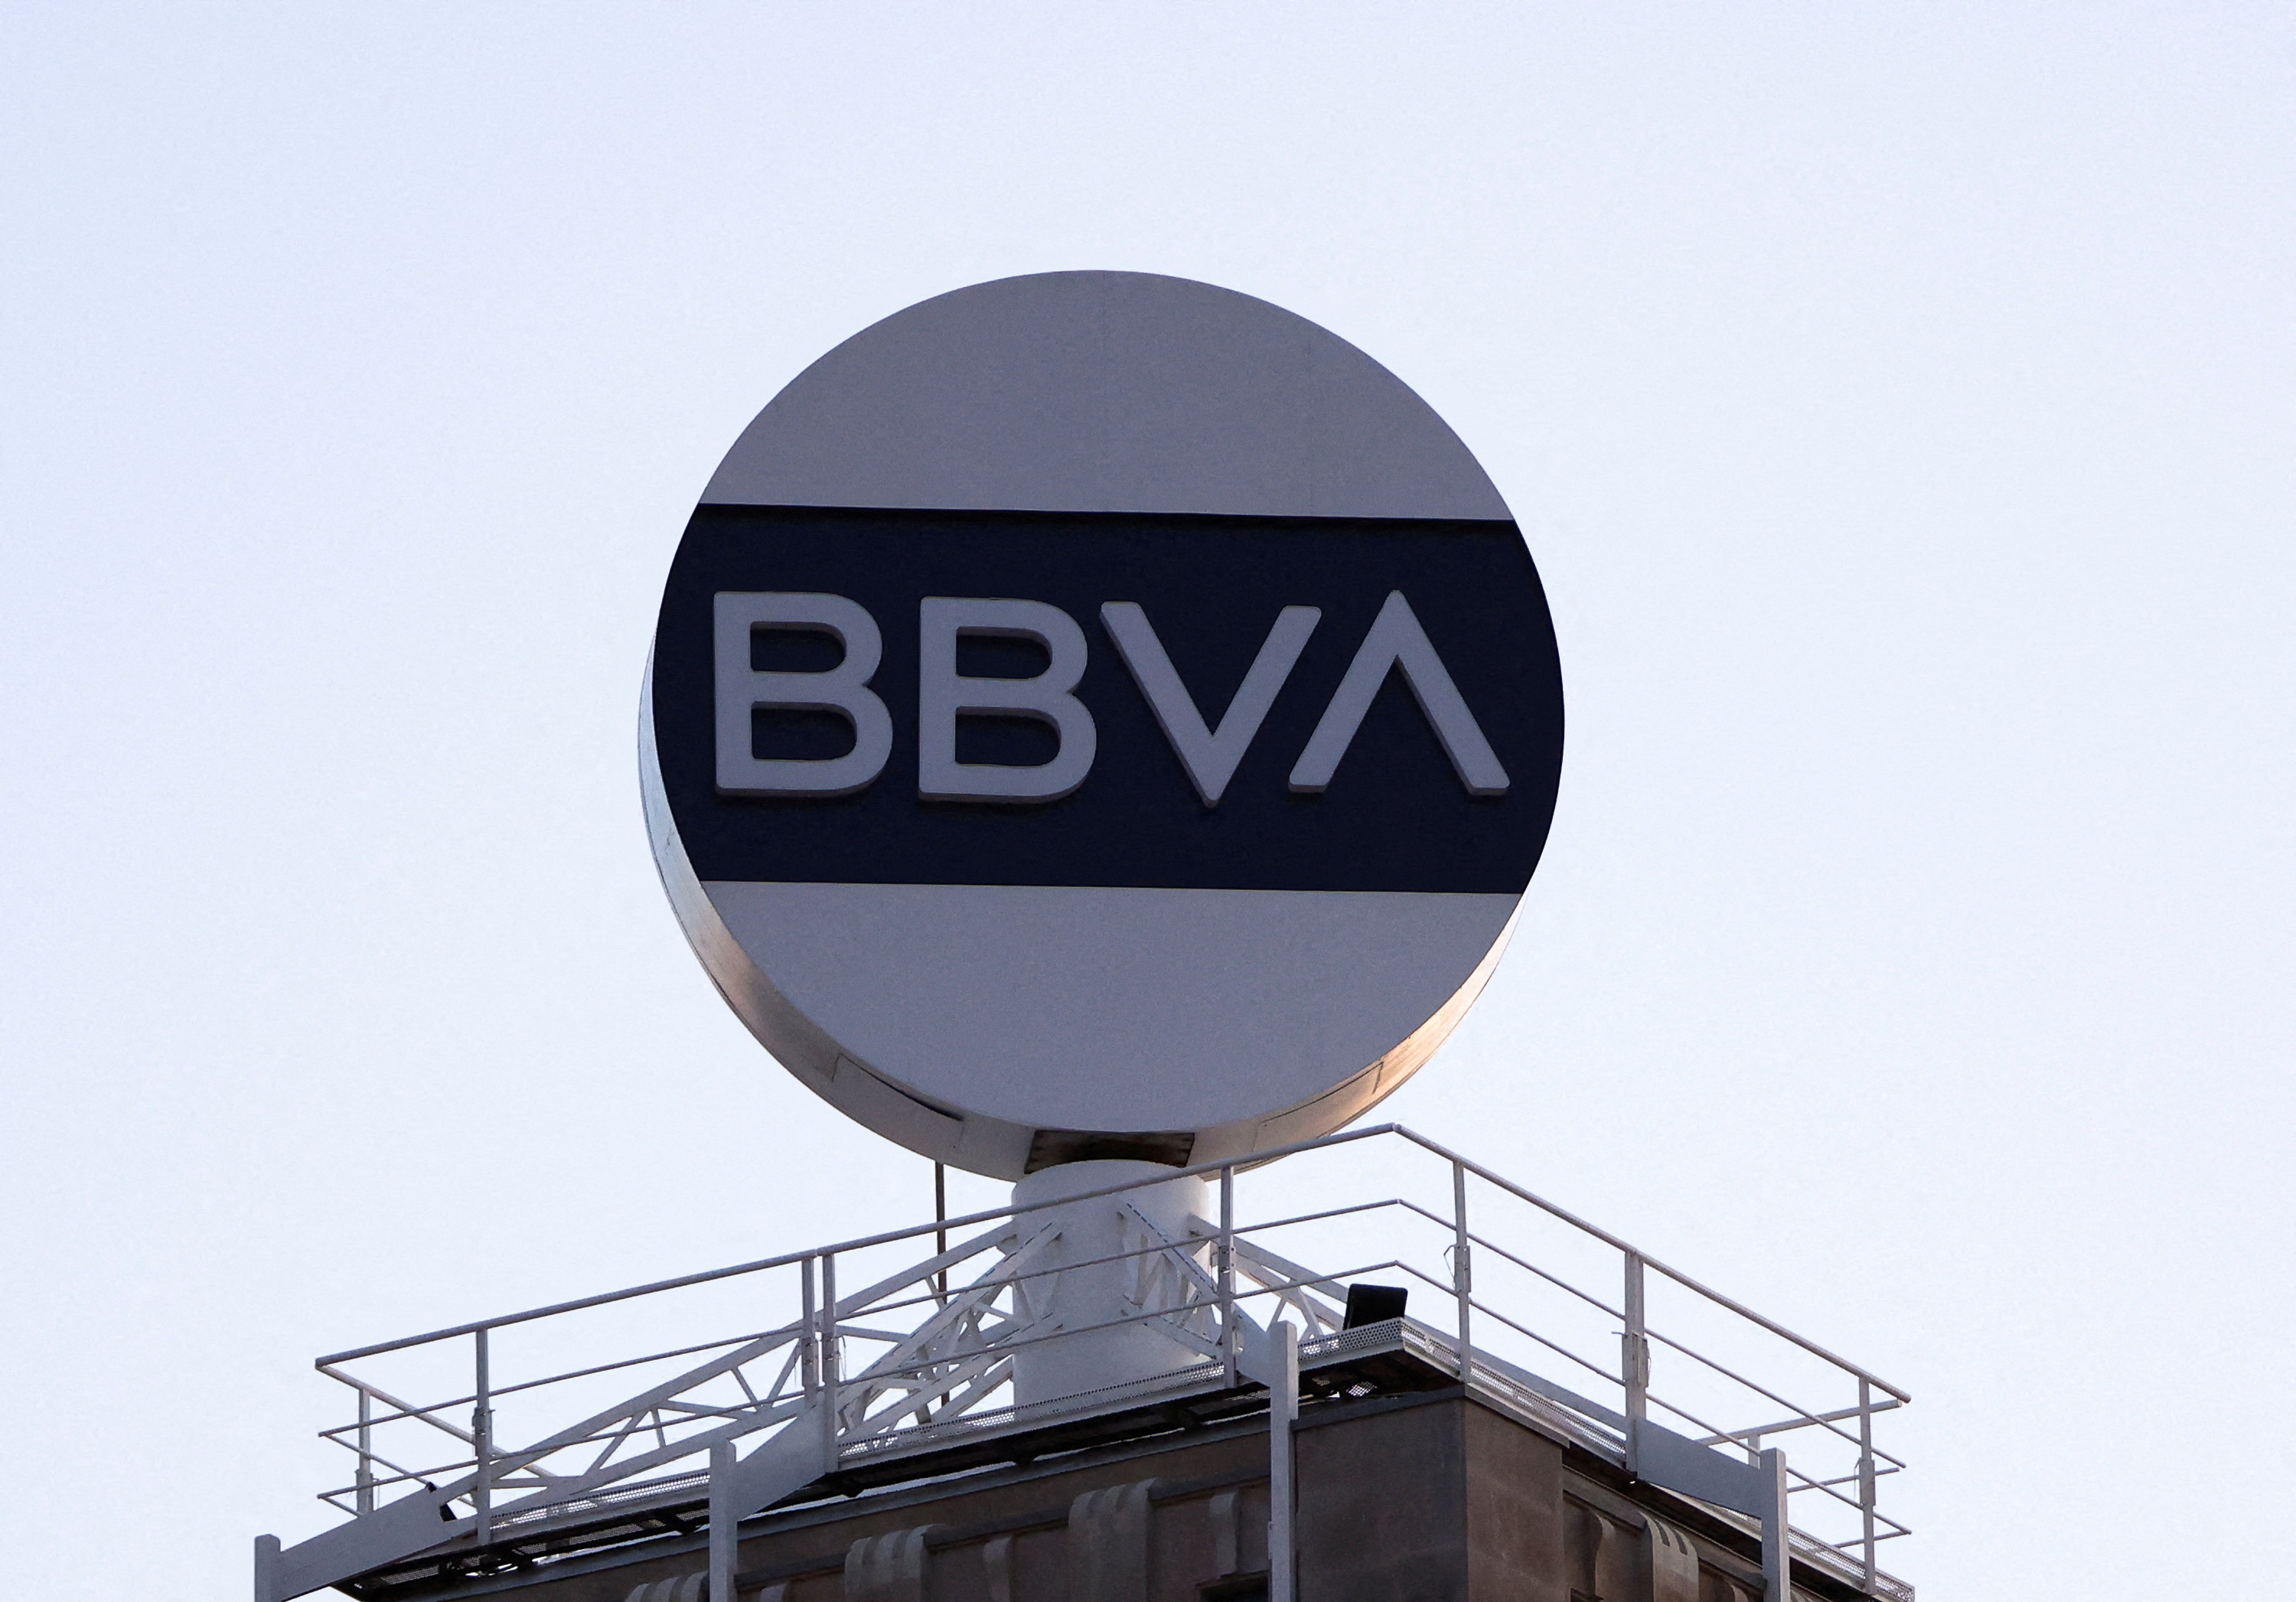 The logo of BBVA bank is displayed in Barcelona